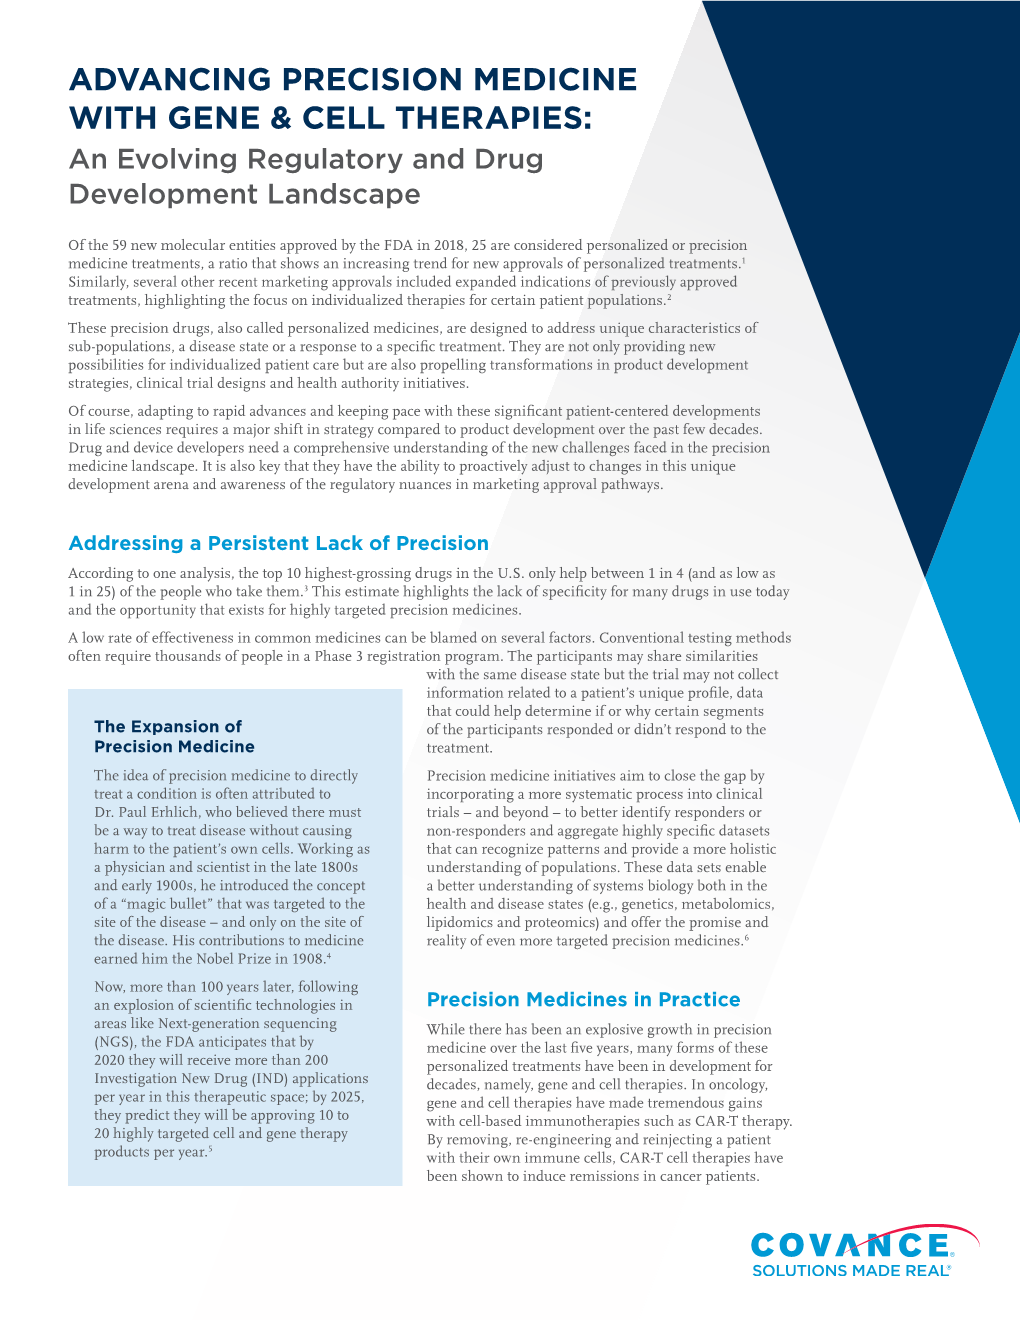 Advancing Precision Medicine with Gene & Cell Therapies: an Evolving Regulatory and Drug Developmnt Landscape